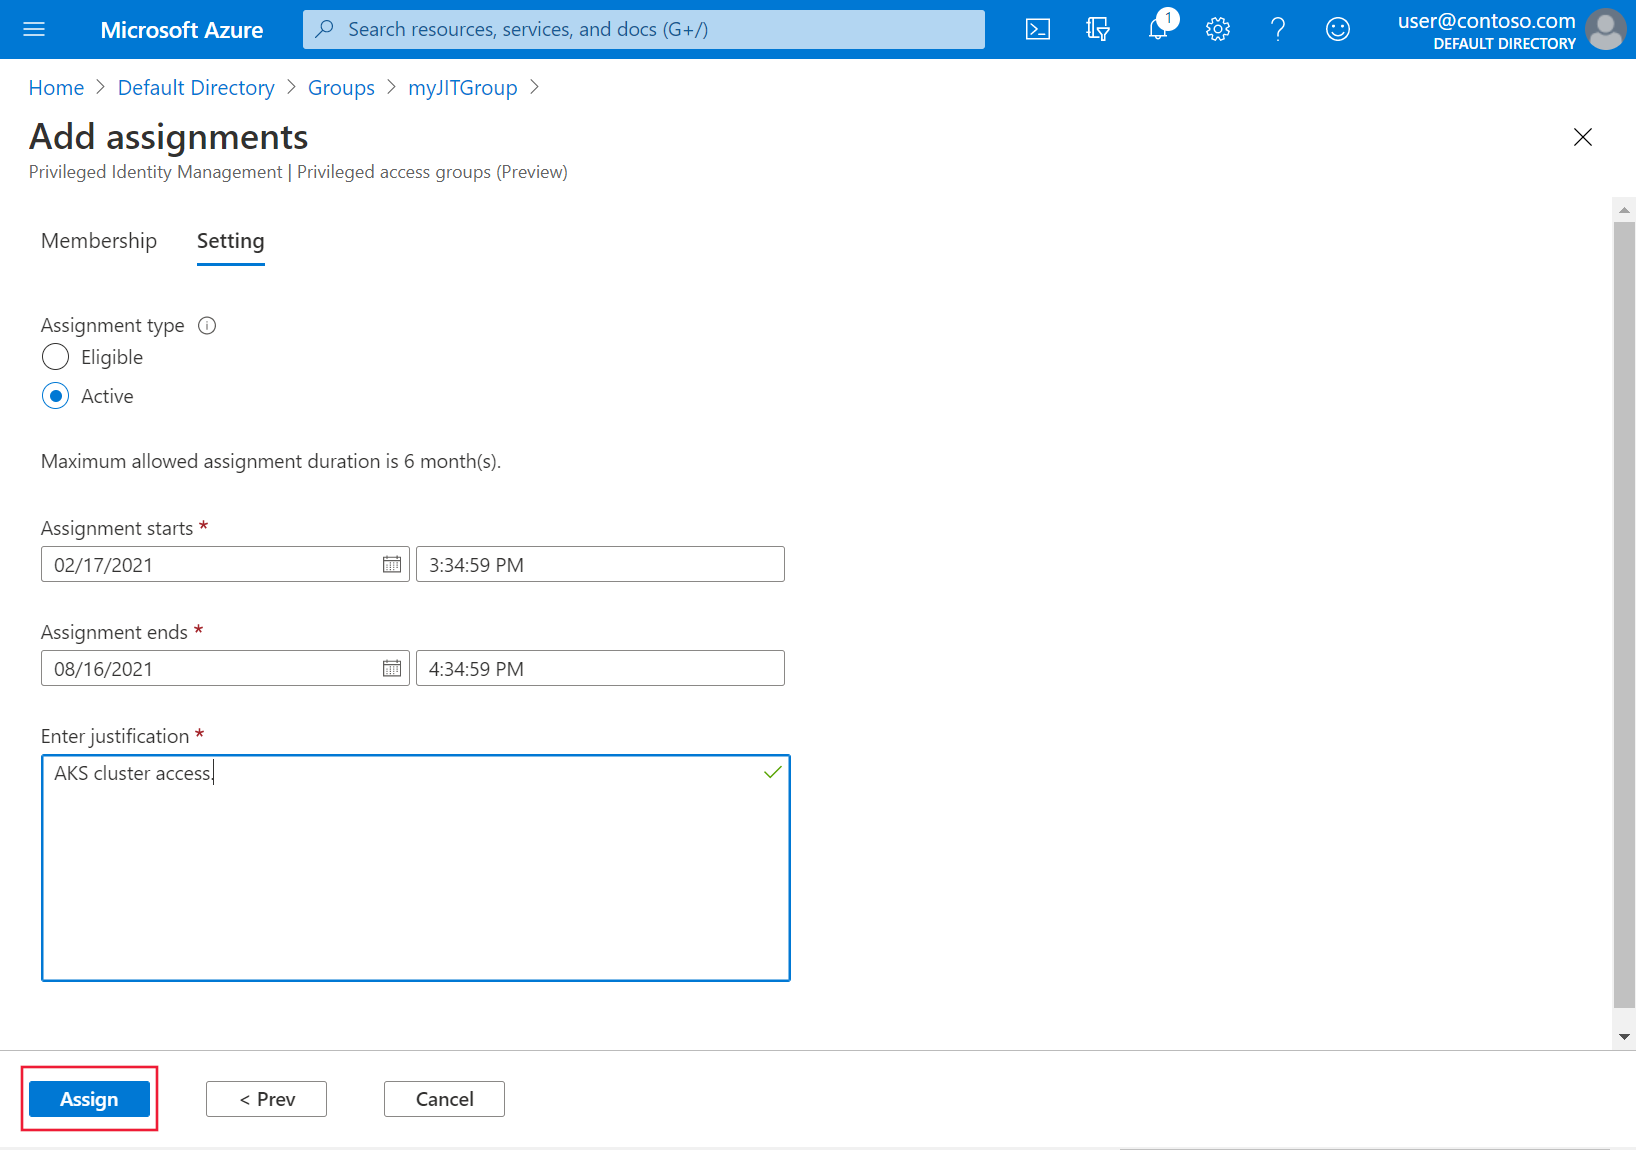 Screenshot of the Add assignments Setting screen in the Azure portal. An assignment type of Active is selected and a sample justification has been given. The Assign option is highlighted.